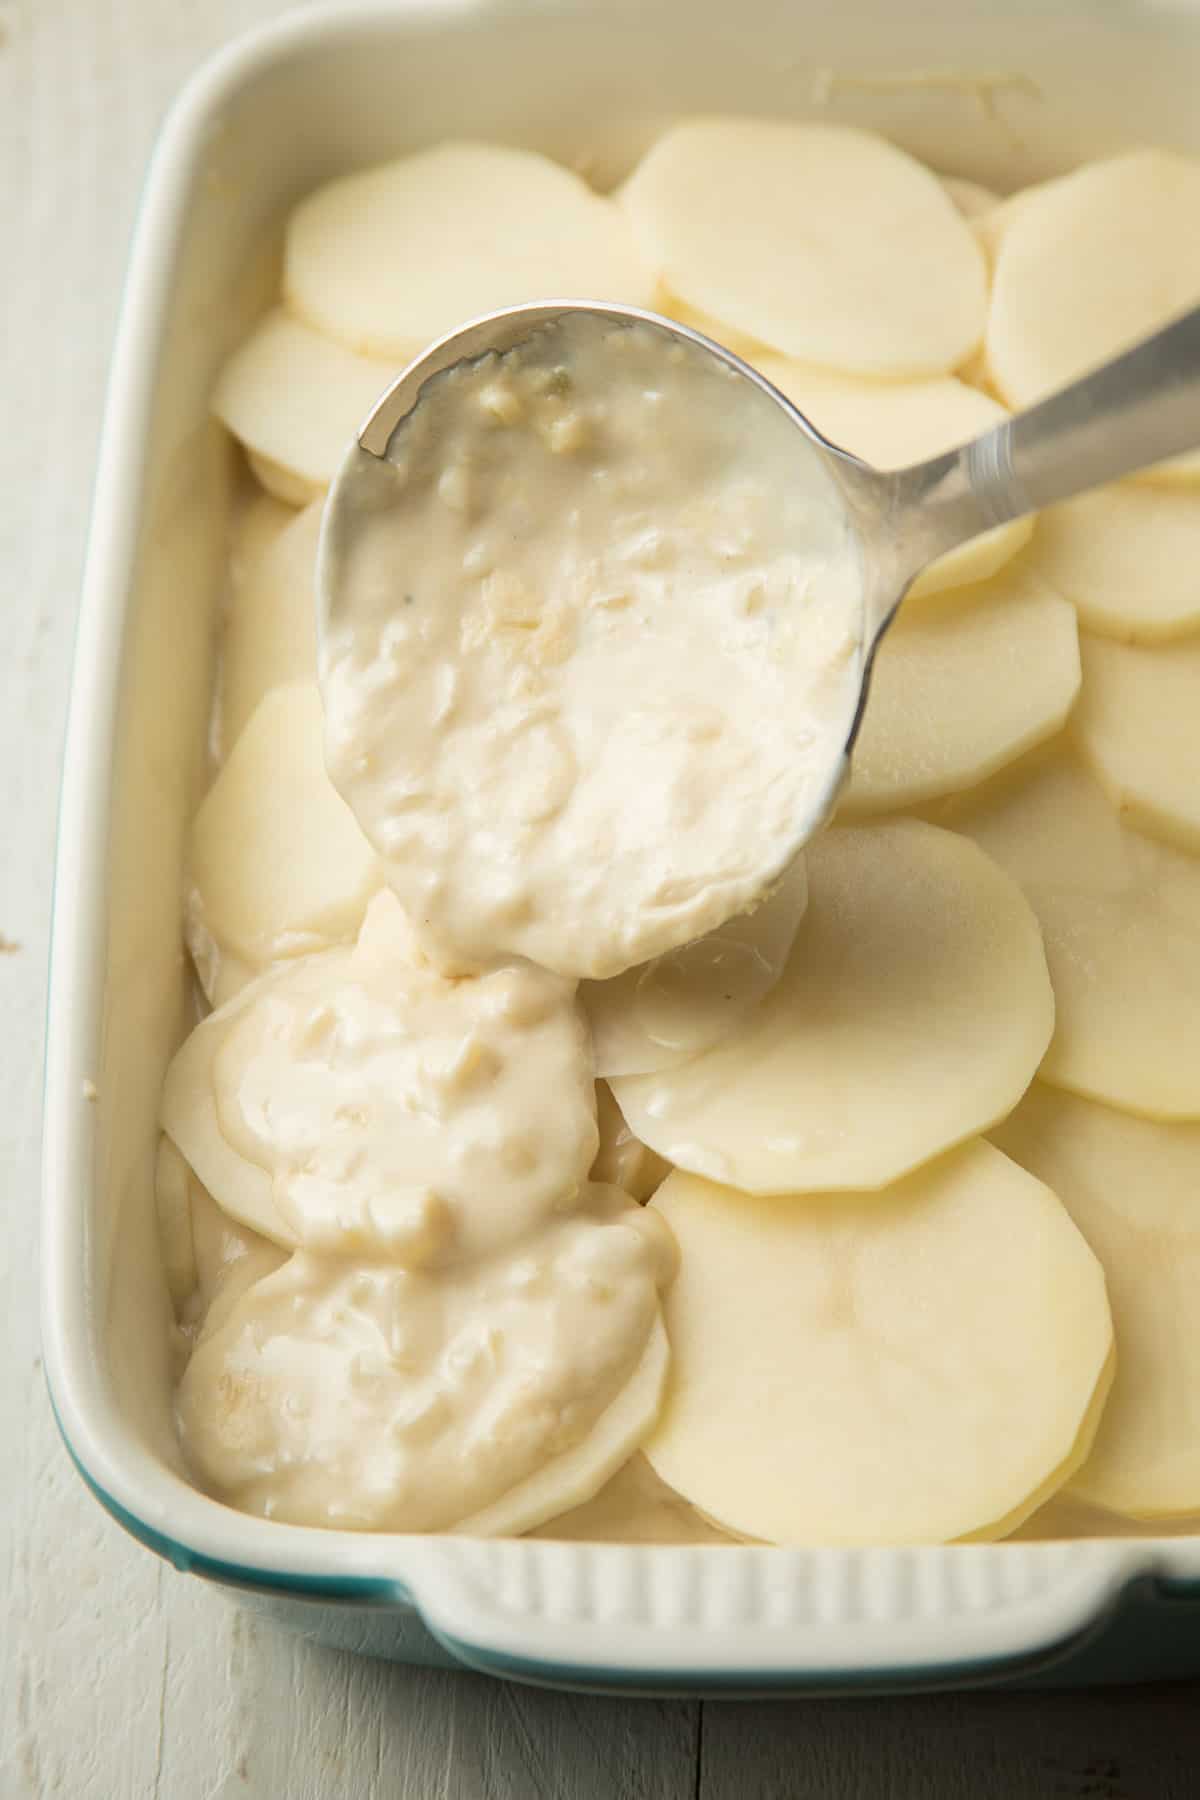 Ladle pouring sauce over sliced potatoes in a baking dish.